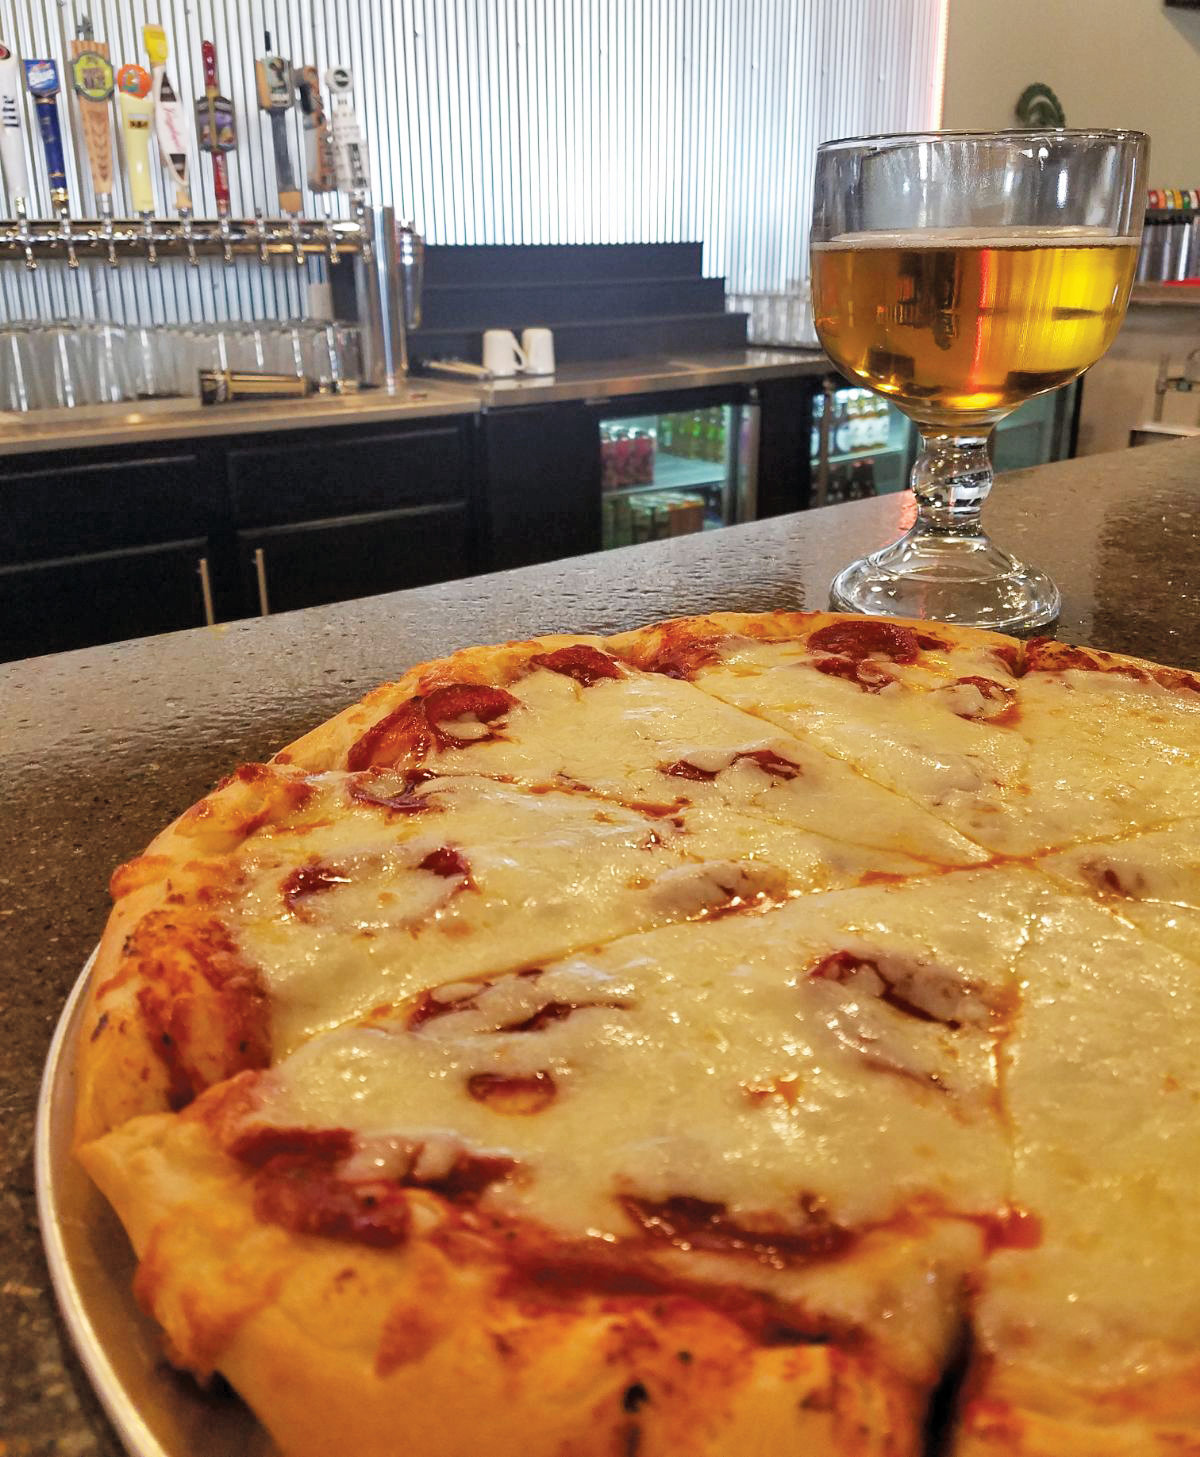 A classic combination: pizza and beer at Art's Pub.